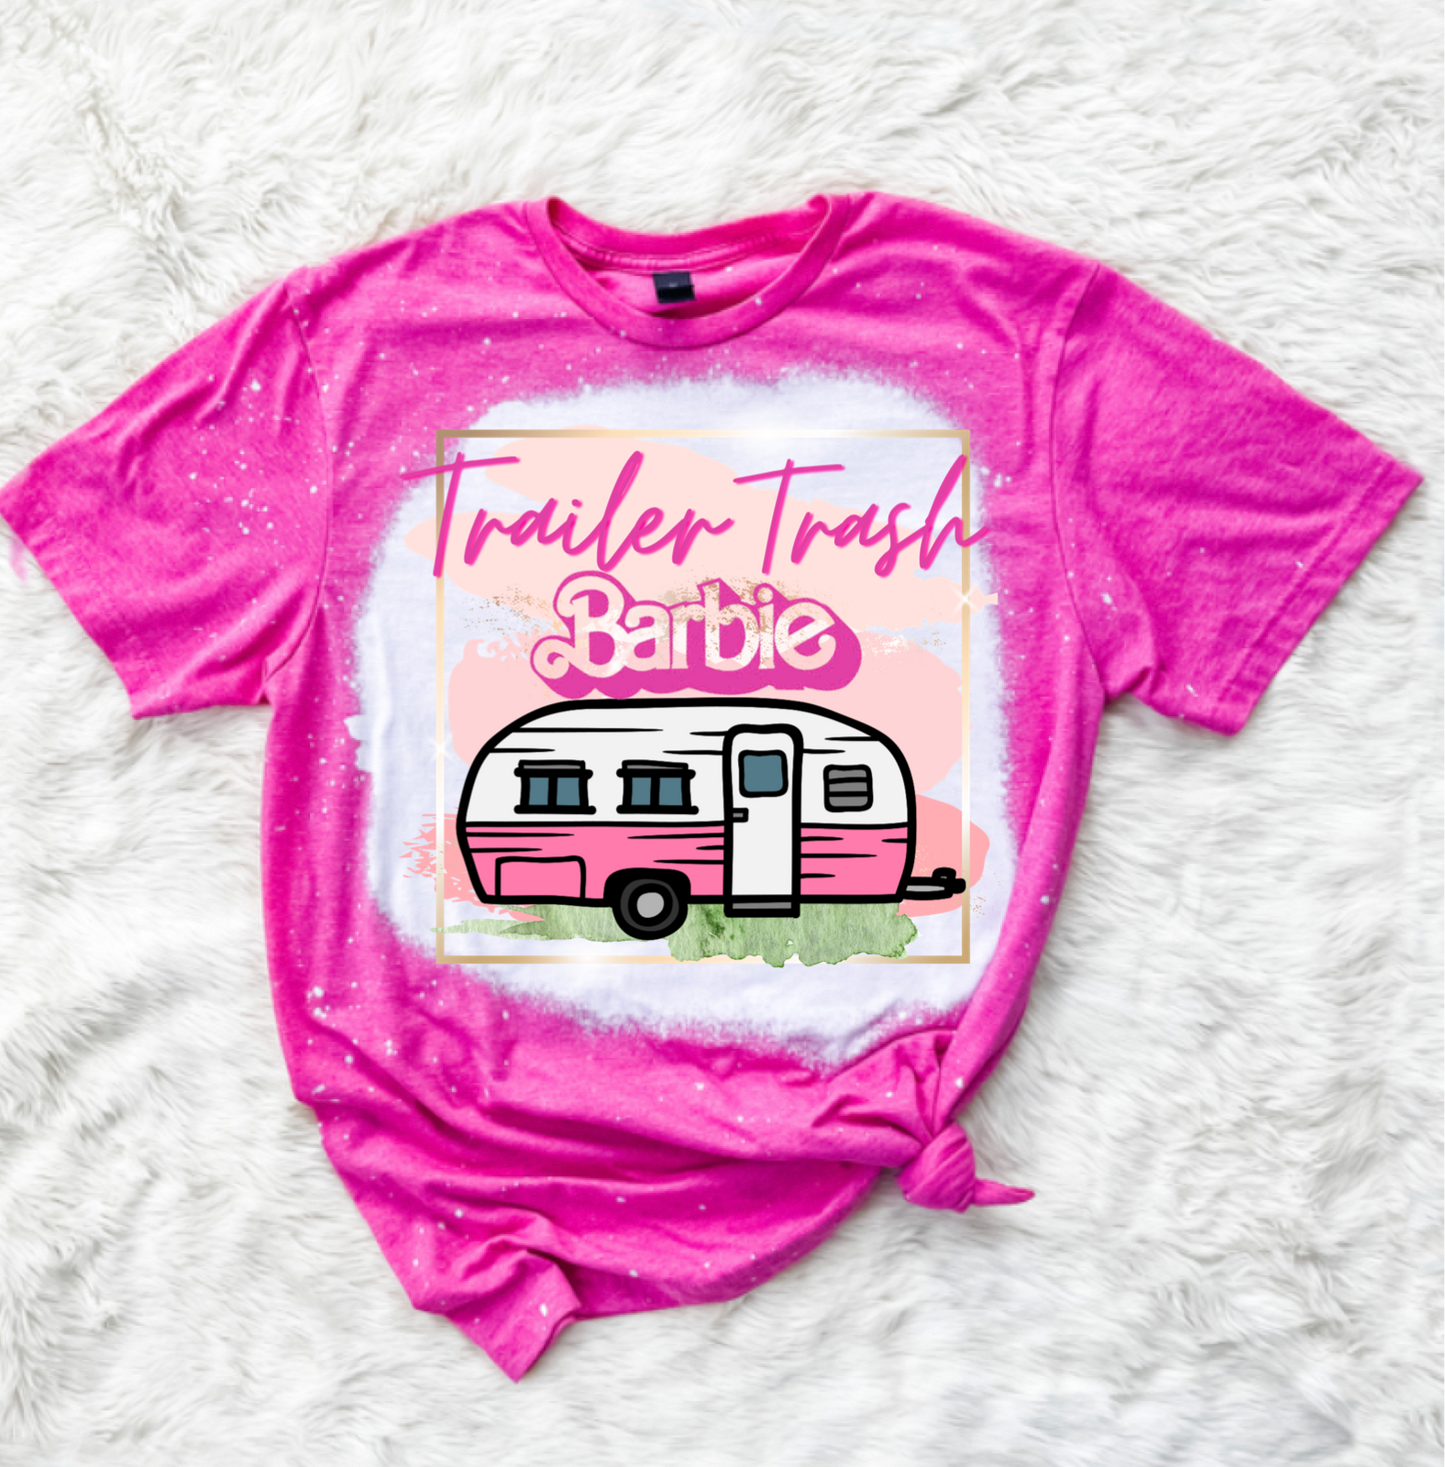 Trailer Trash Barbie - also available in Black